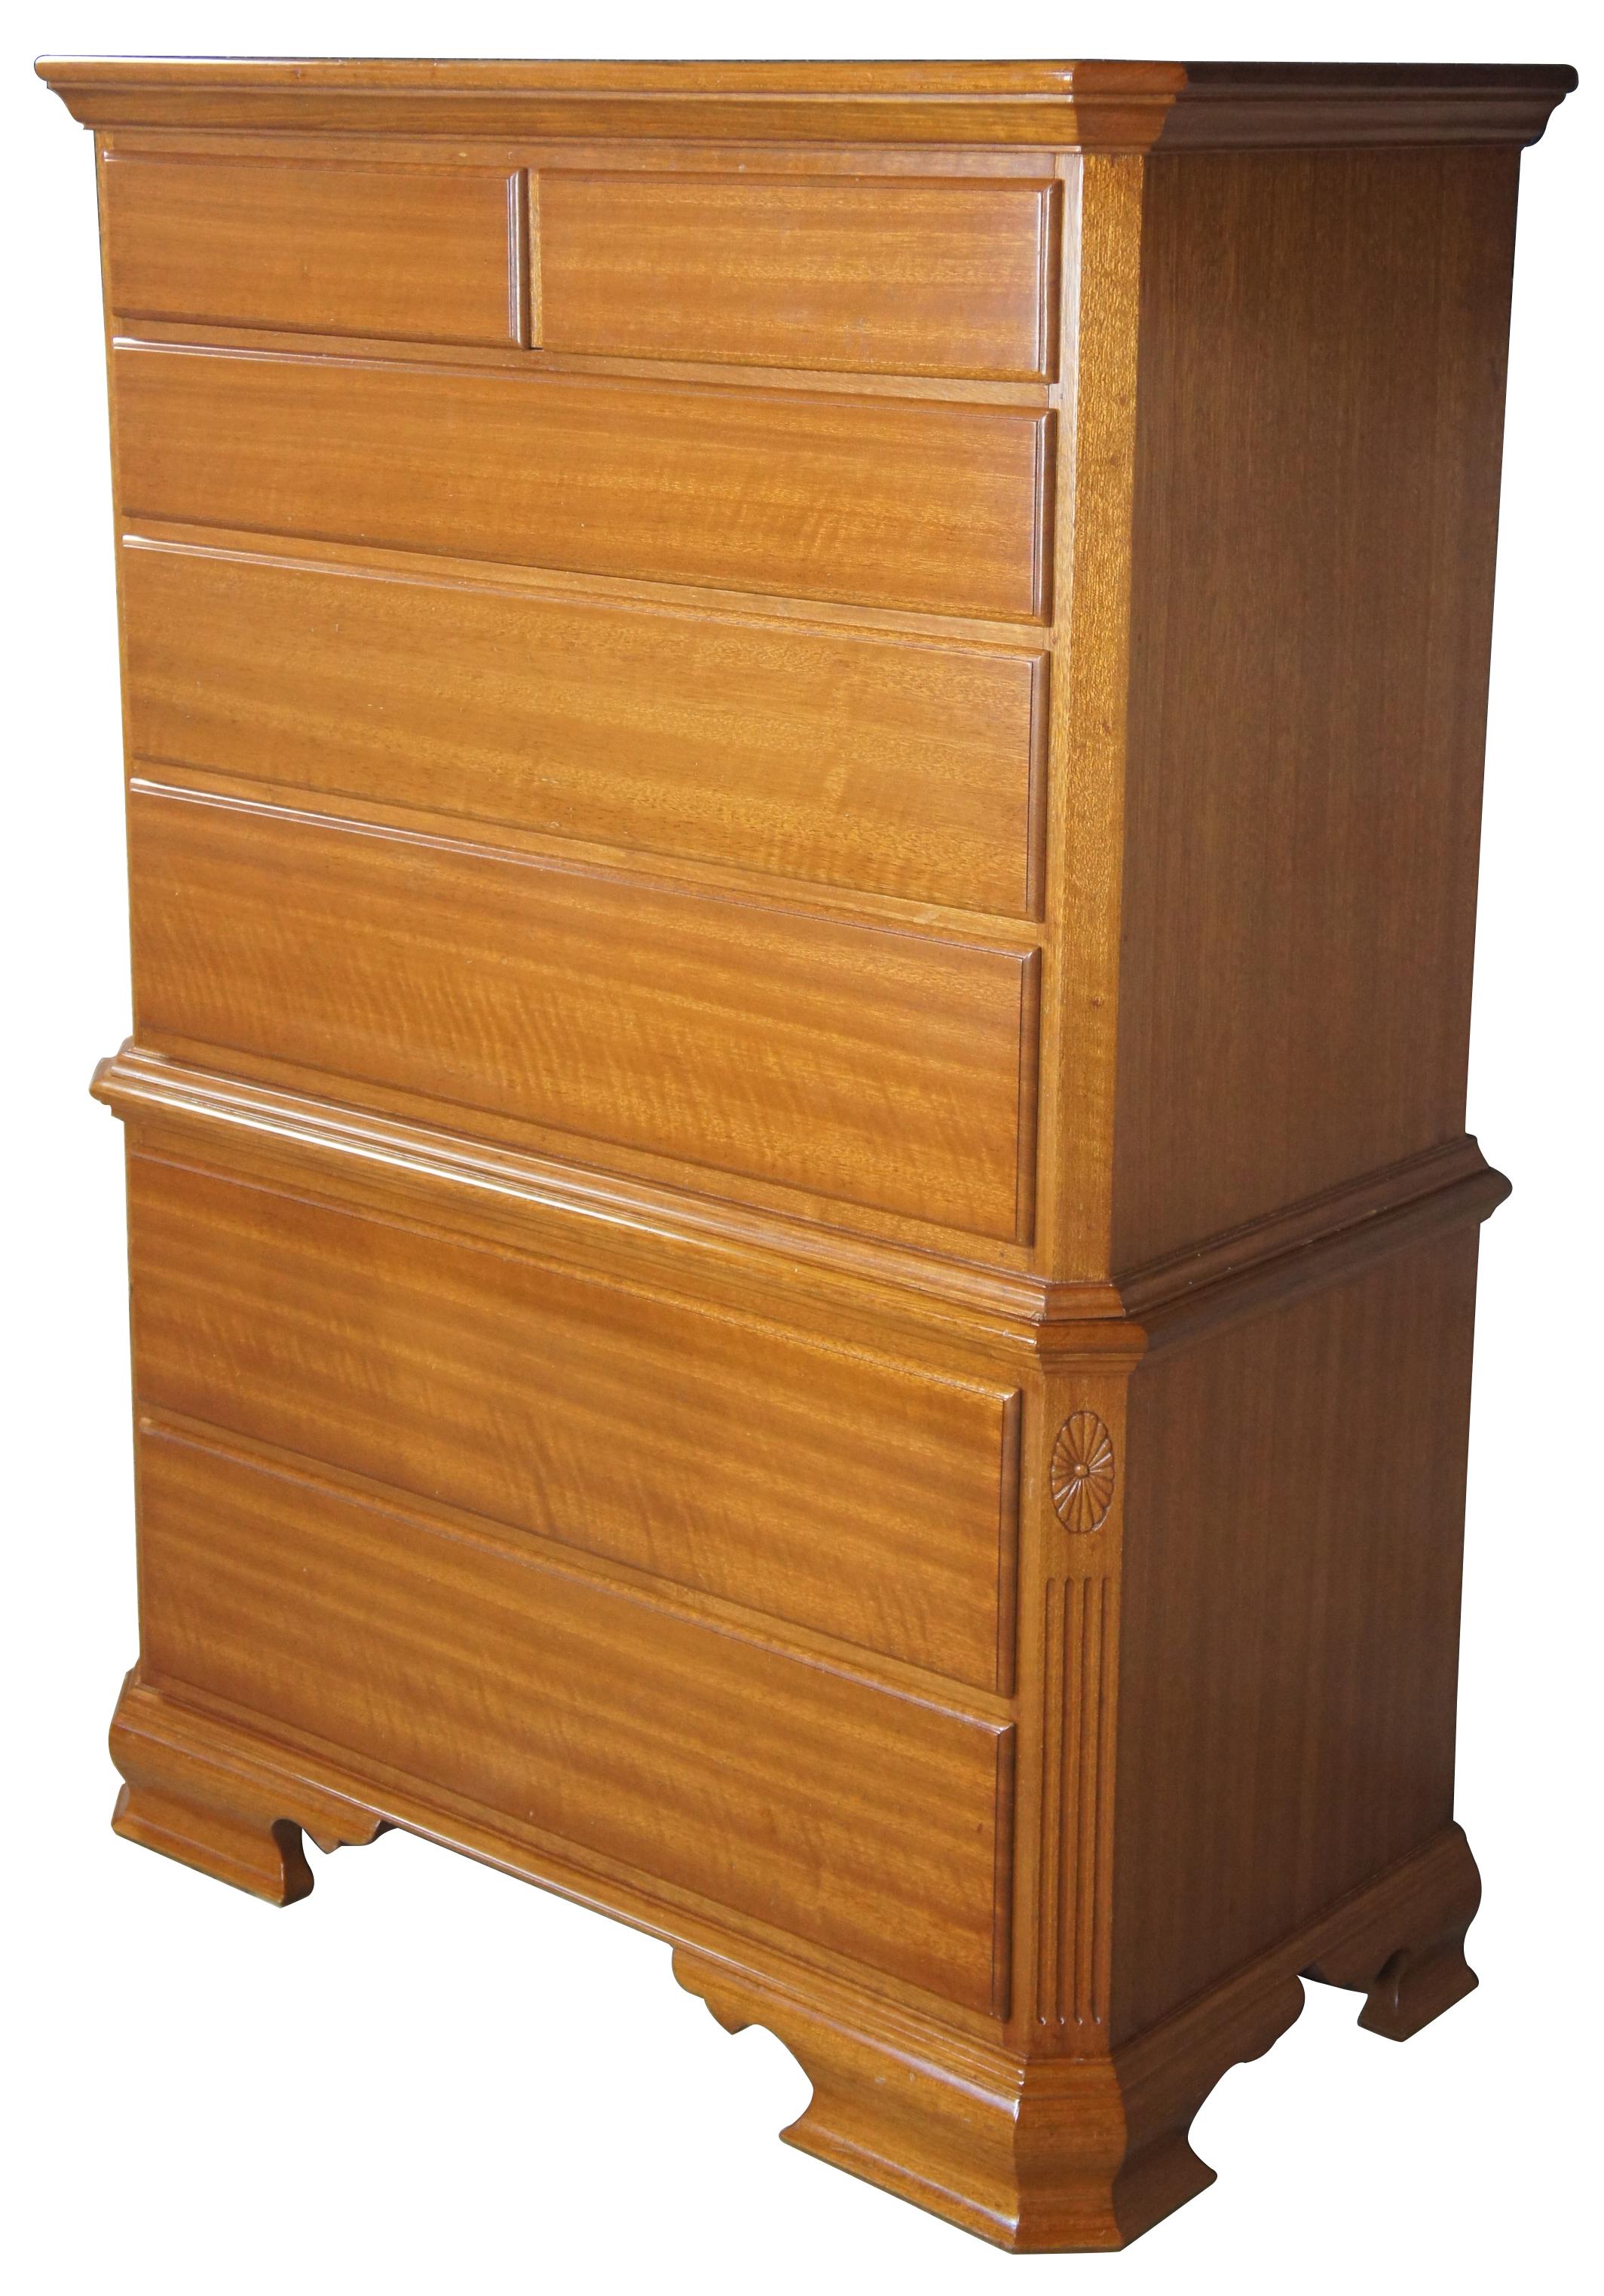 Georgian Early American Style Solid Mahogany Chest on Chest Highboy Dresser